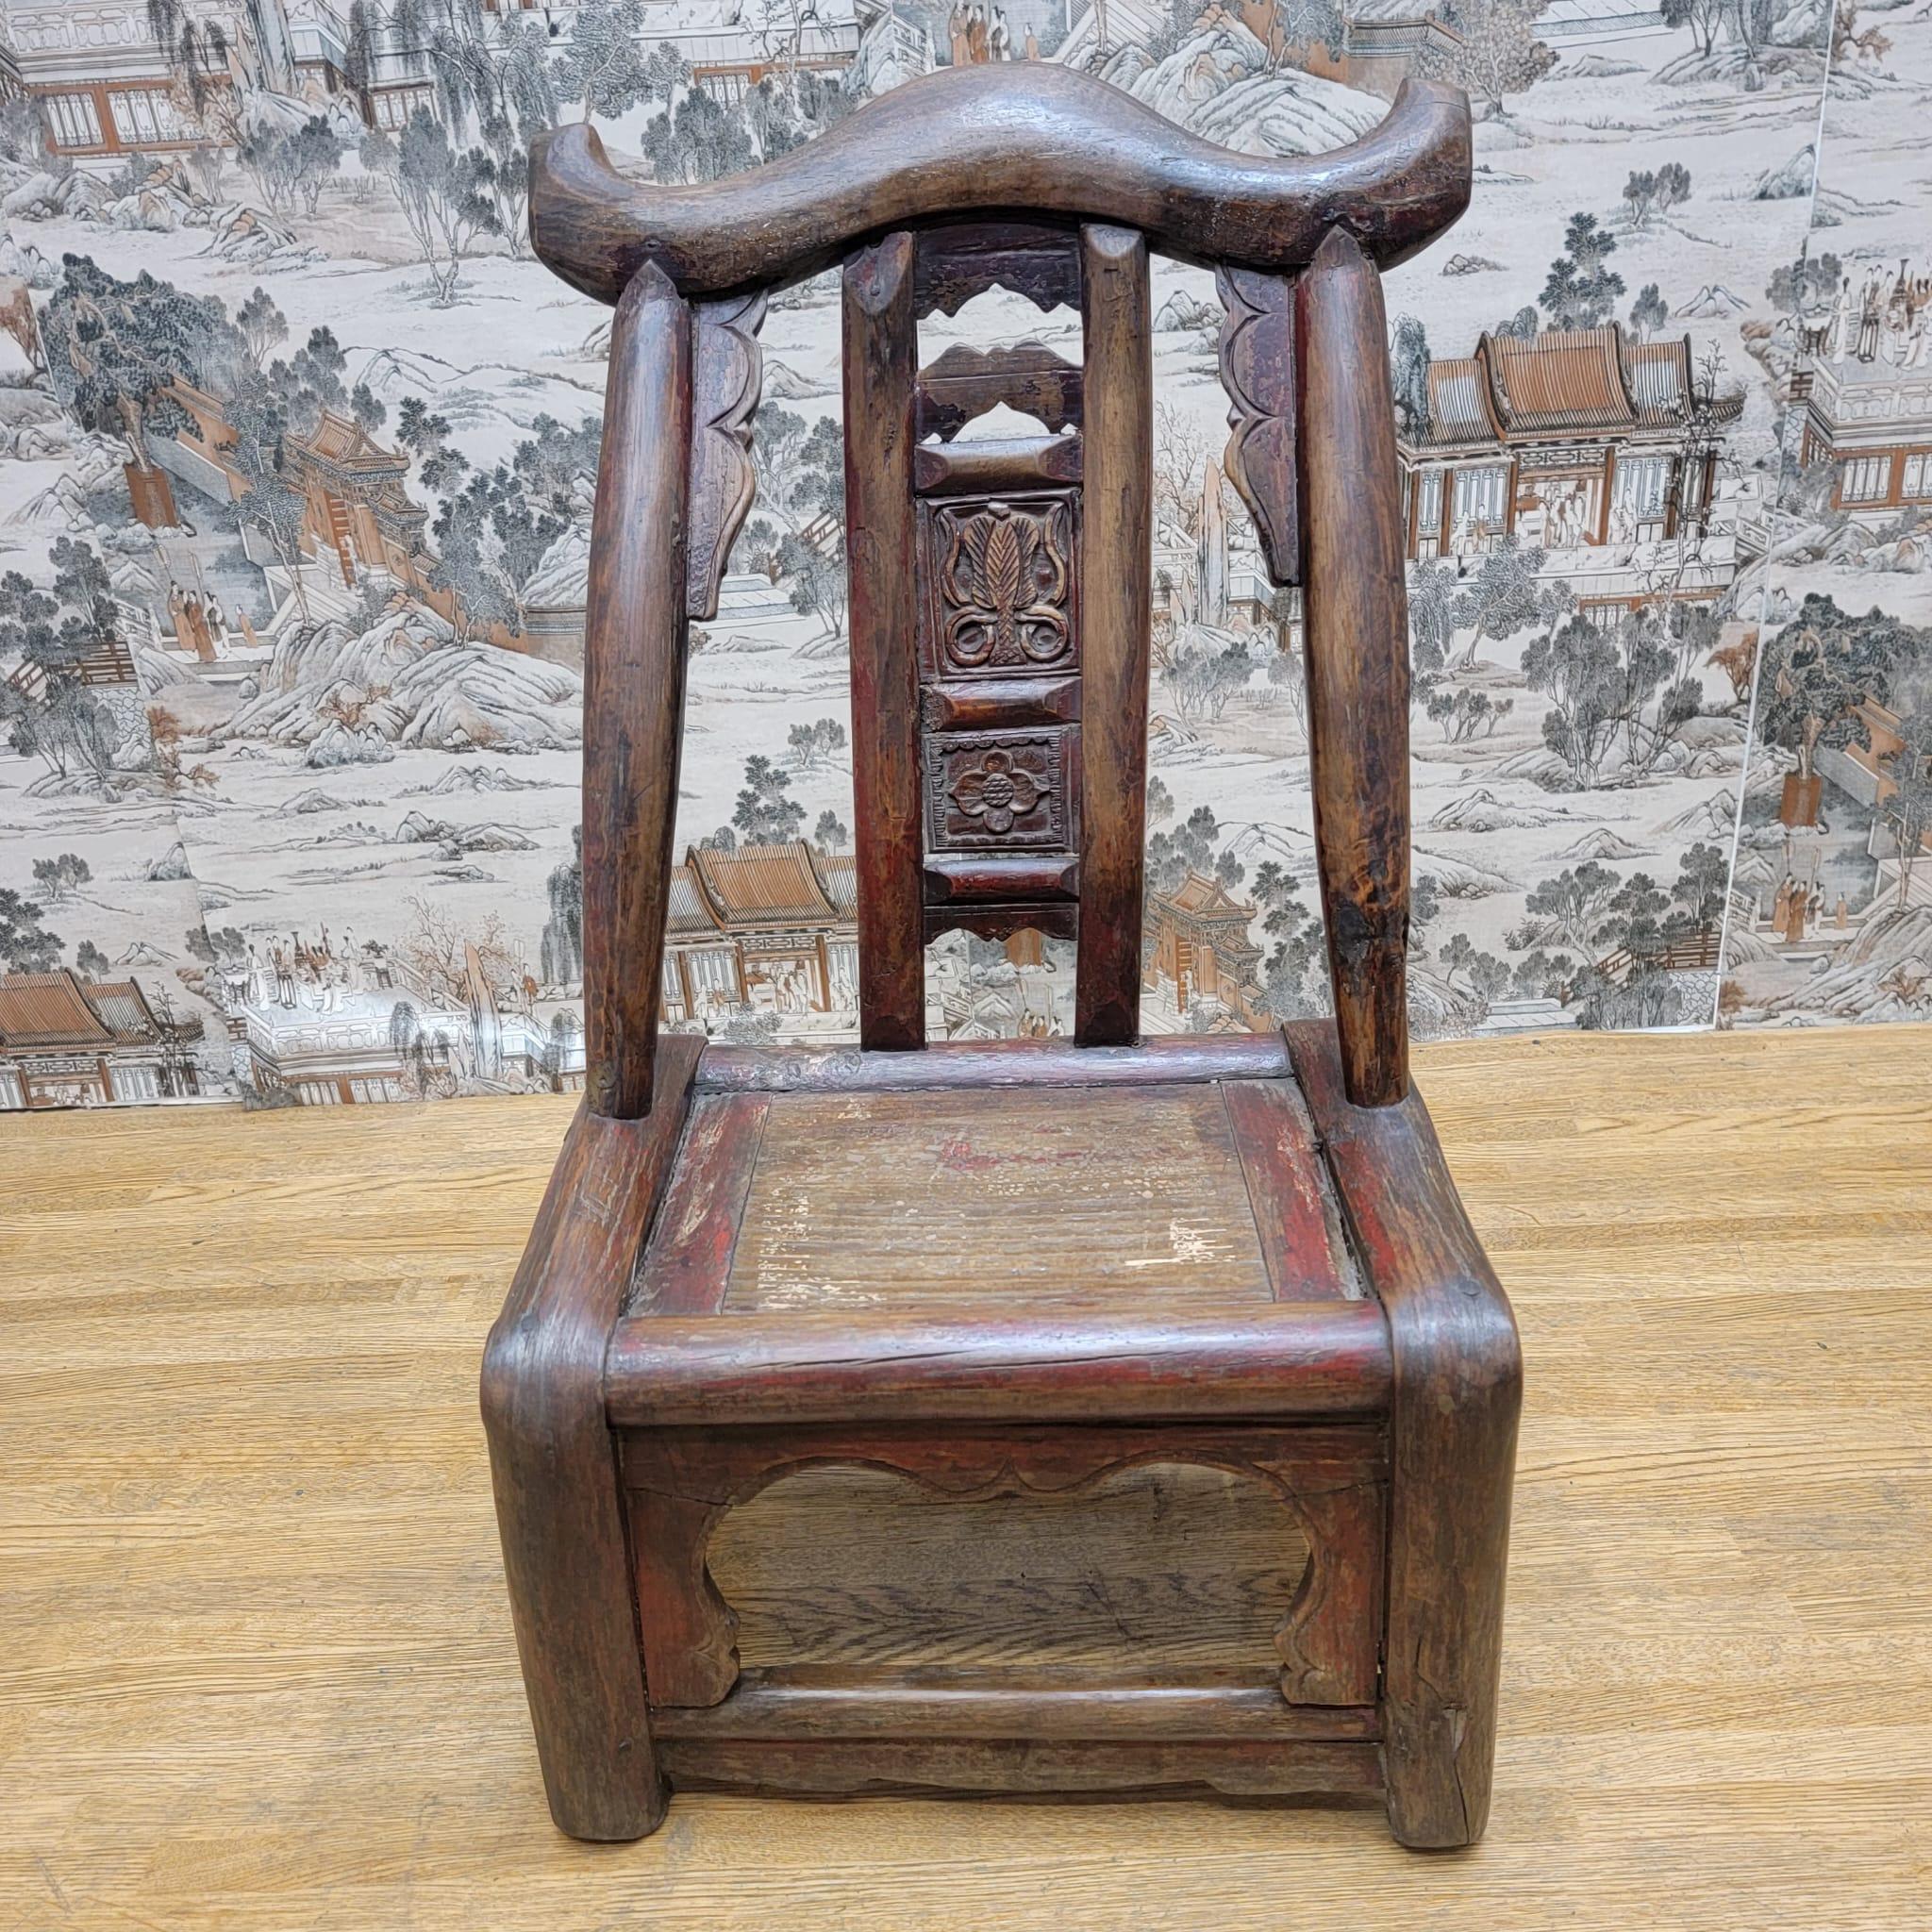 Antique Shanxi province hand carved elm child chair.

This elm child's chair from the Shanxi Province of China is hand carved and an extremely rare piece. All natural patina. 

Circa 1880s

Dimensions:

H 25